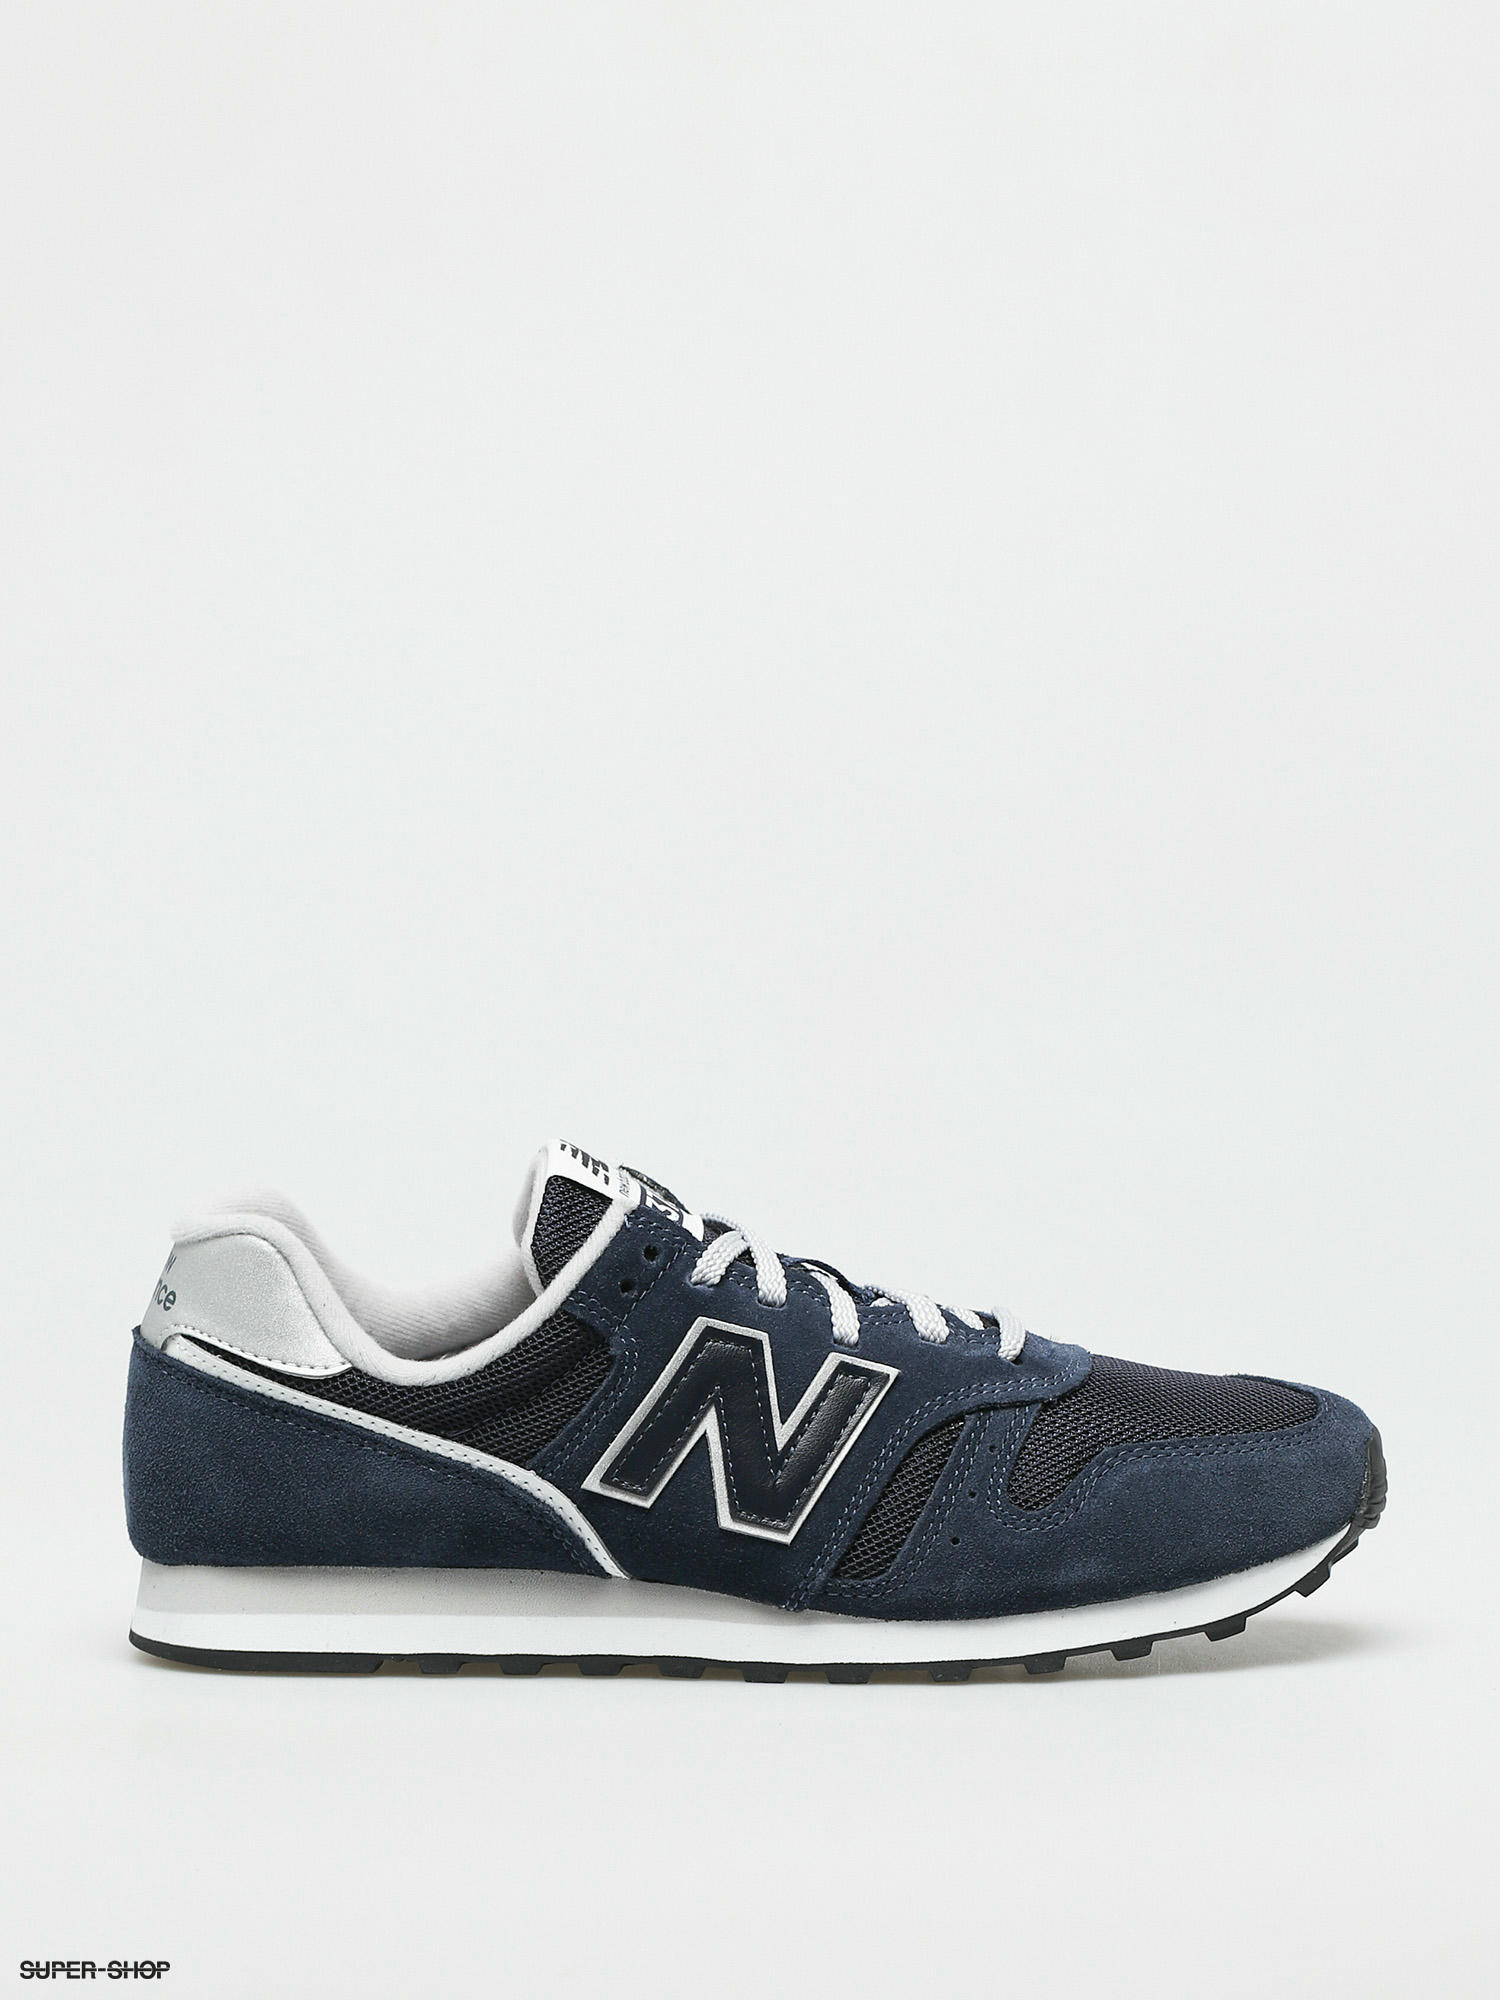 New Balance 373 Shoes (navy)